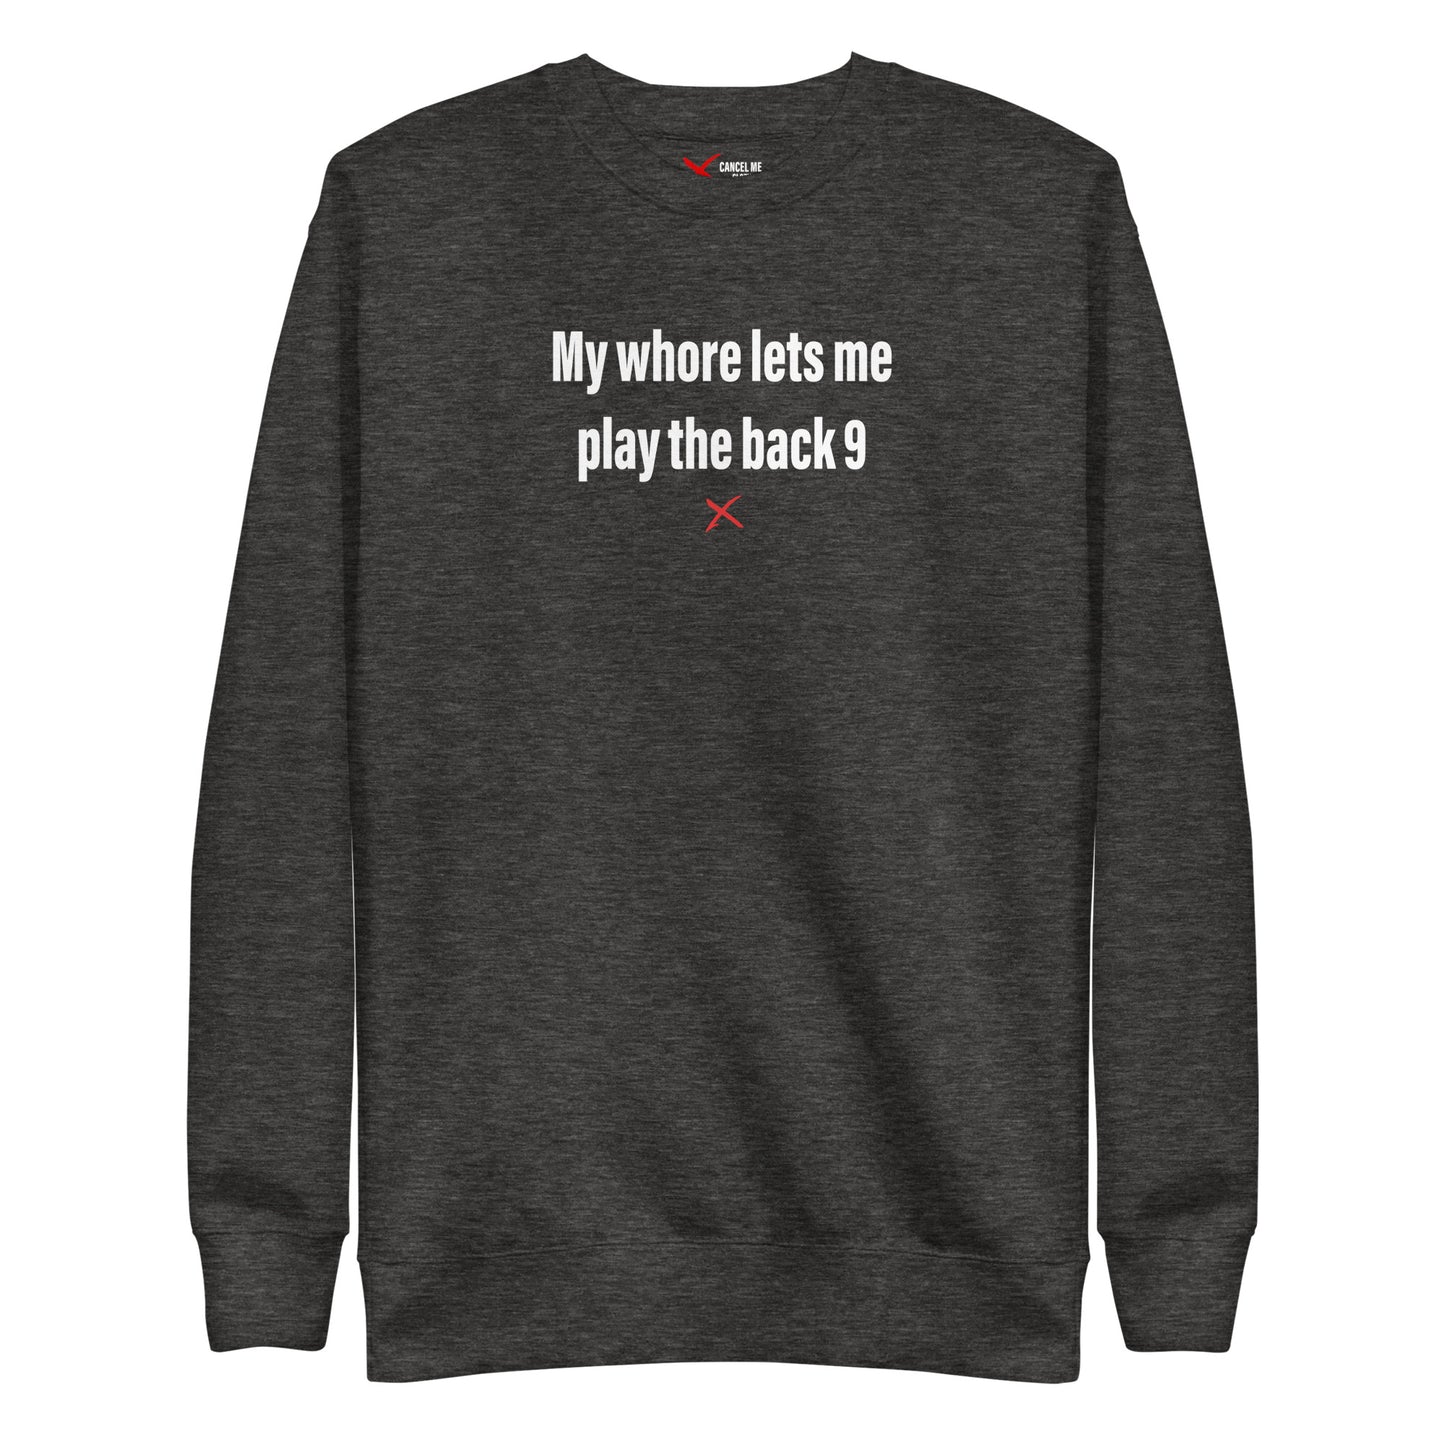 My whore lets me play the back 9 - Sweatshirt